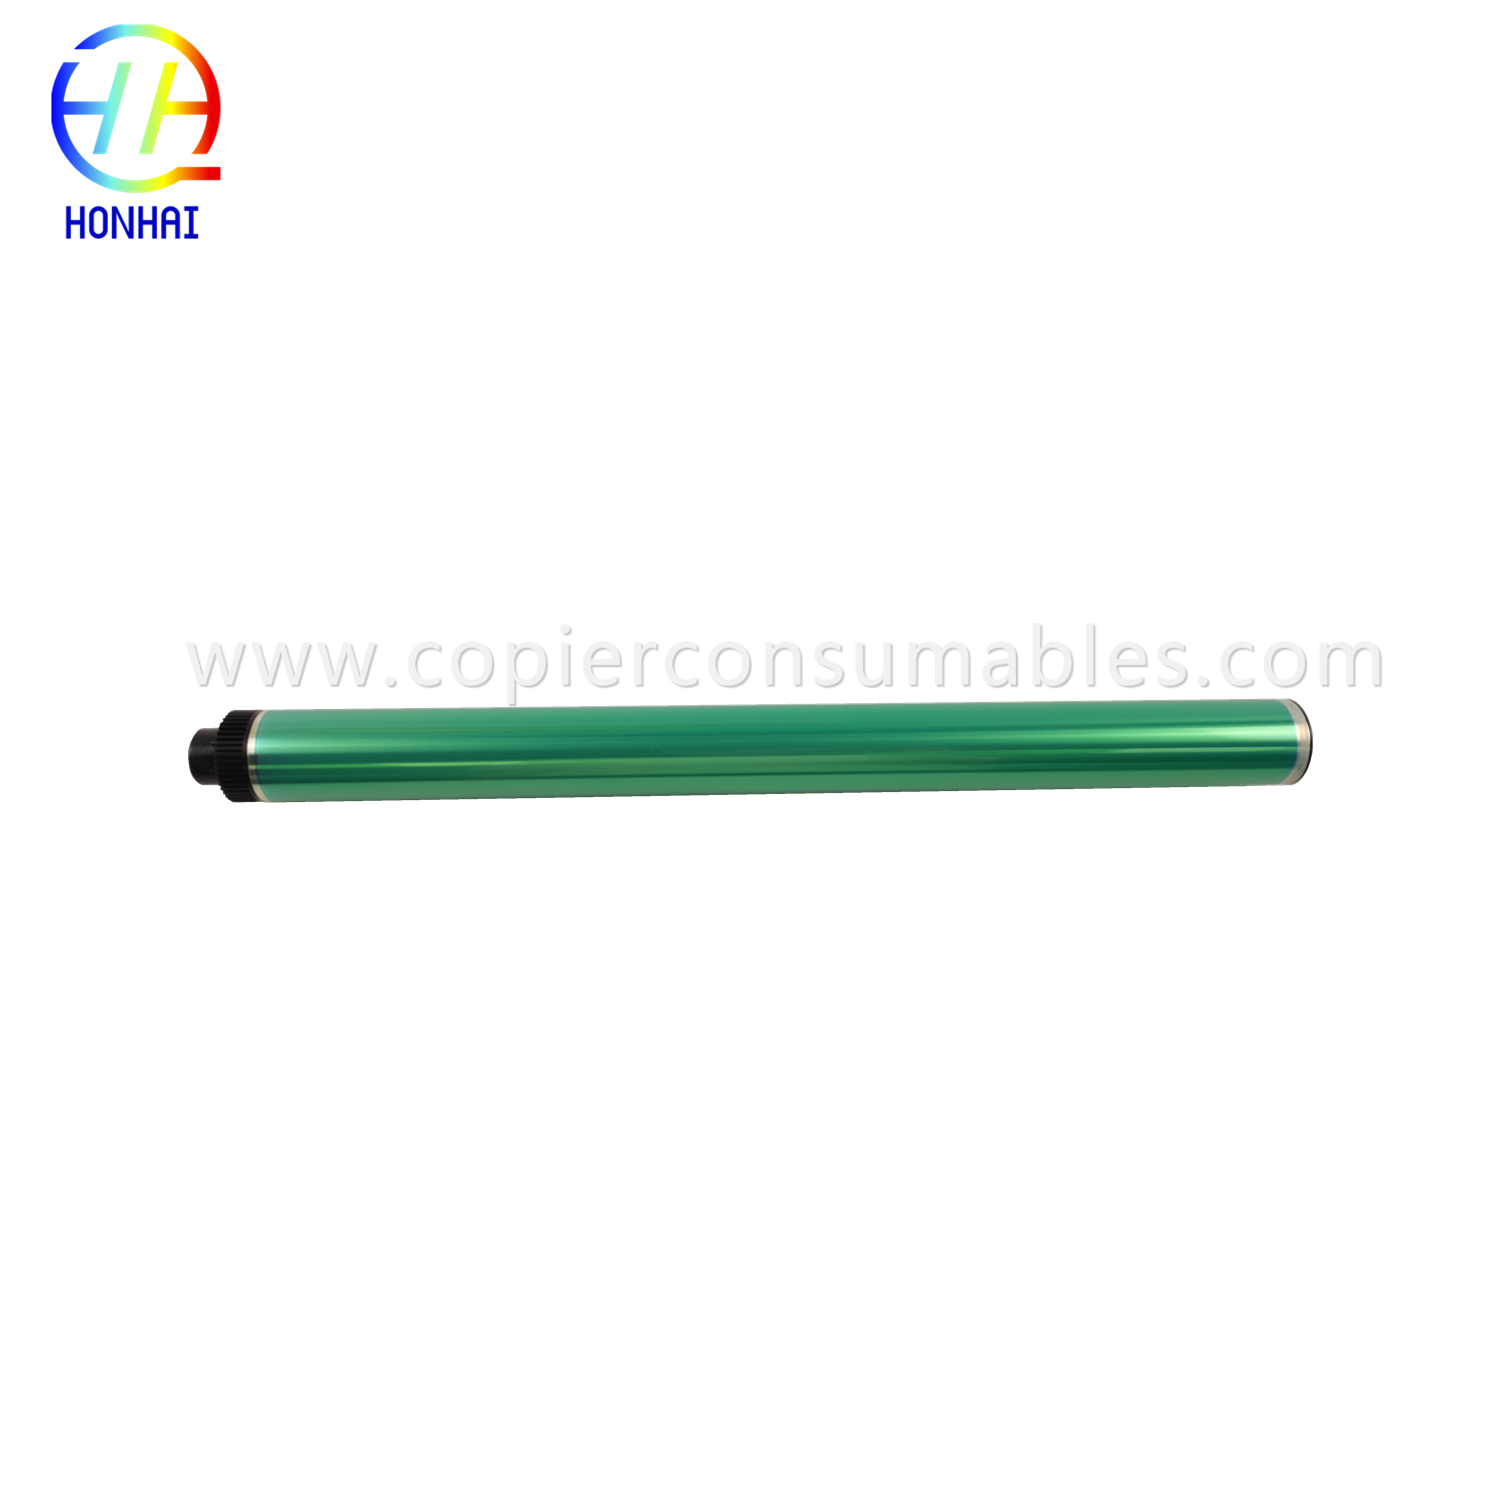 OPC Drum foar HP CF257A 57A M436DN M433A M437 M439 & Samsung K2200 707 SL-K2200ND MLT-D707S R707